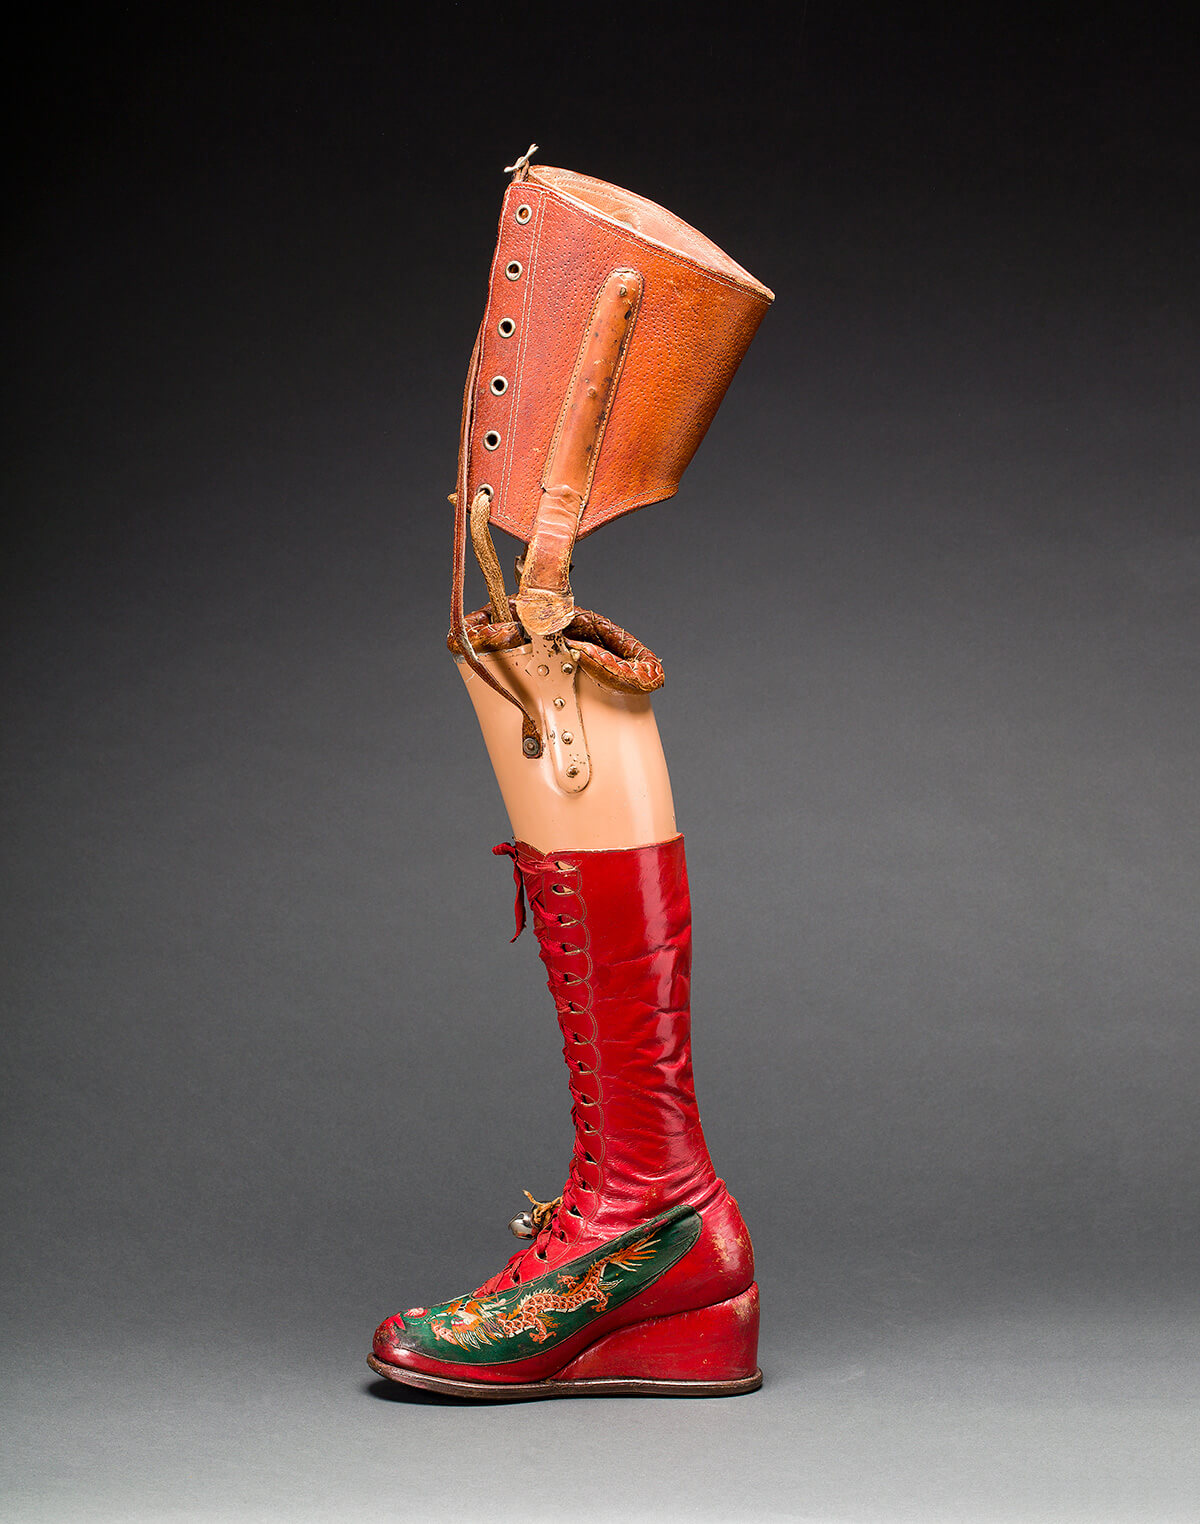 Frida Kahlo's prosthetic leg with leather boot. Appliqued silk with embroidered Chinese motifs. Photograph Javier Hinojosa. Museo Frida Kahlo. © Diego Riviera and Frida Kahlo Archives, Banco de Mexico, Fiduciary of the Trust of the Diego Riviera and Frida Kahlo Museums.